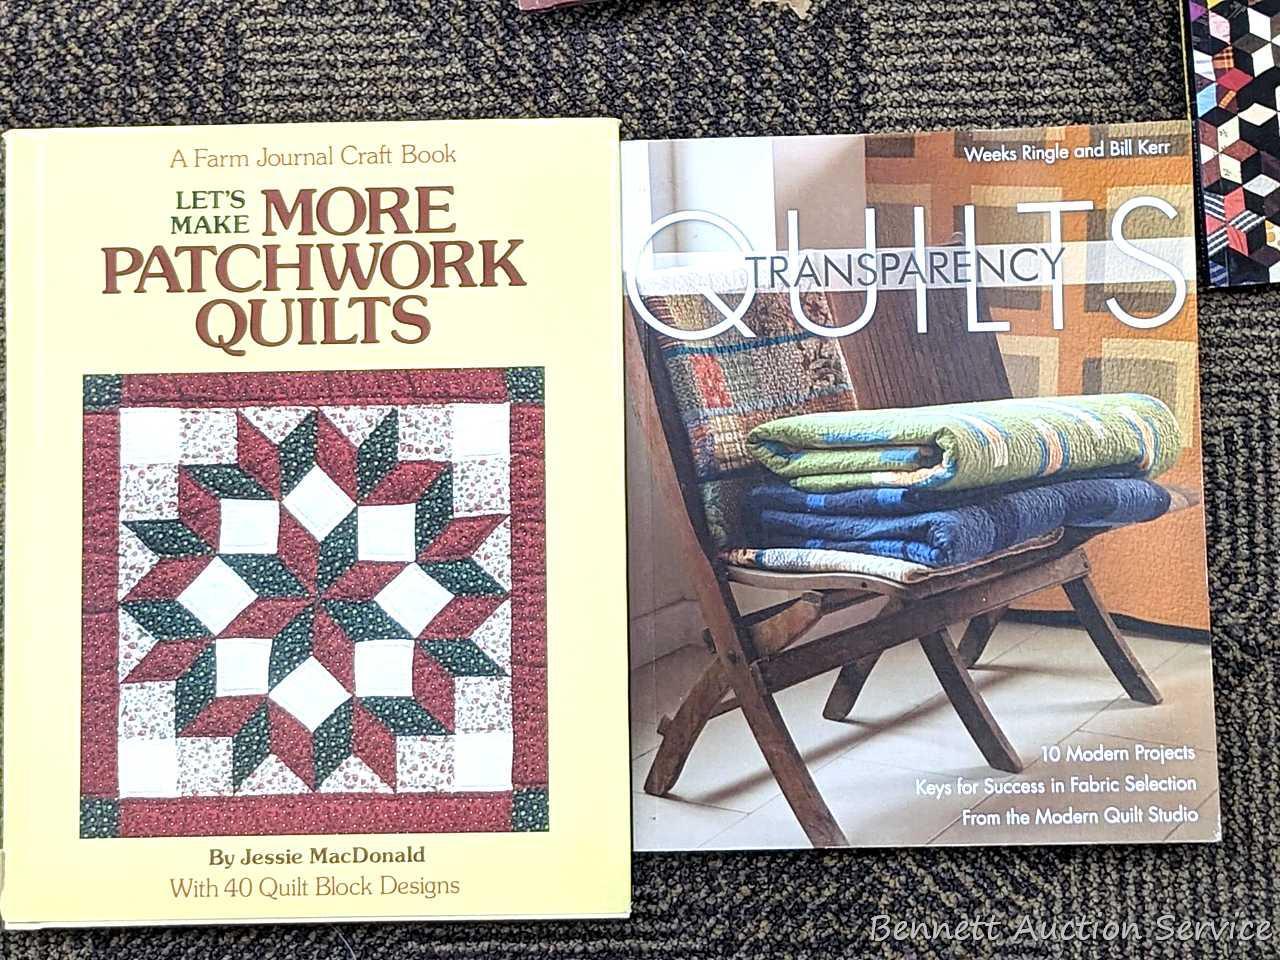 Quilting books include titles like Quilts of